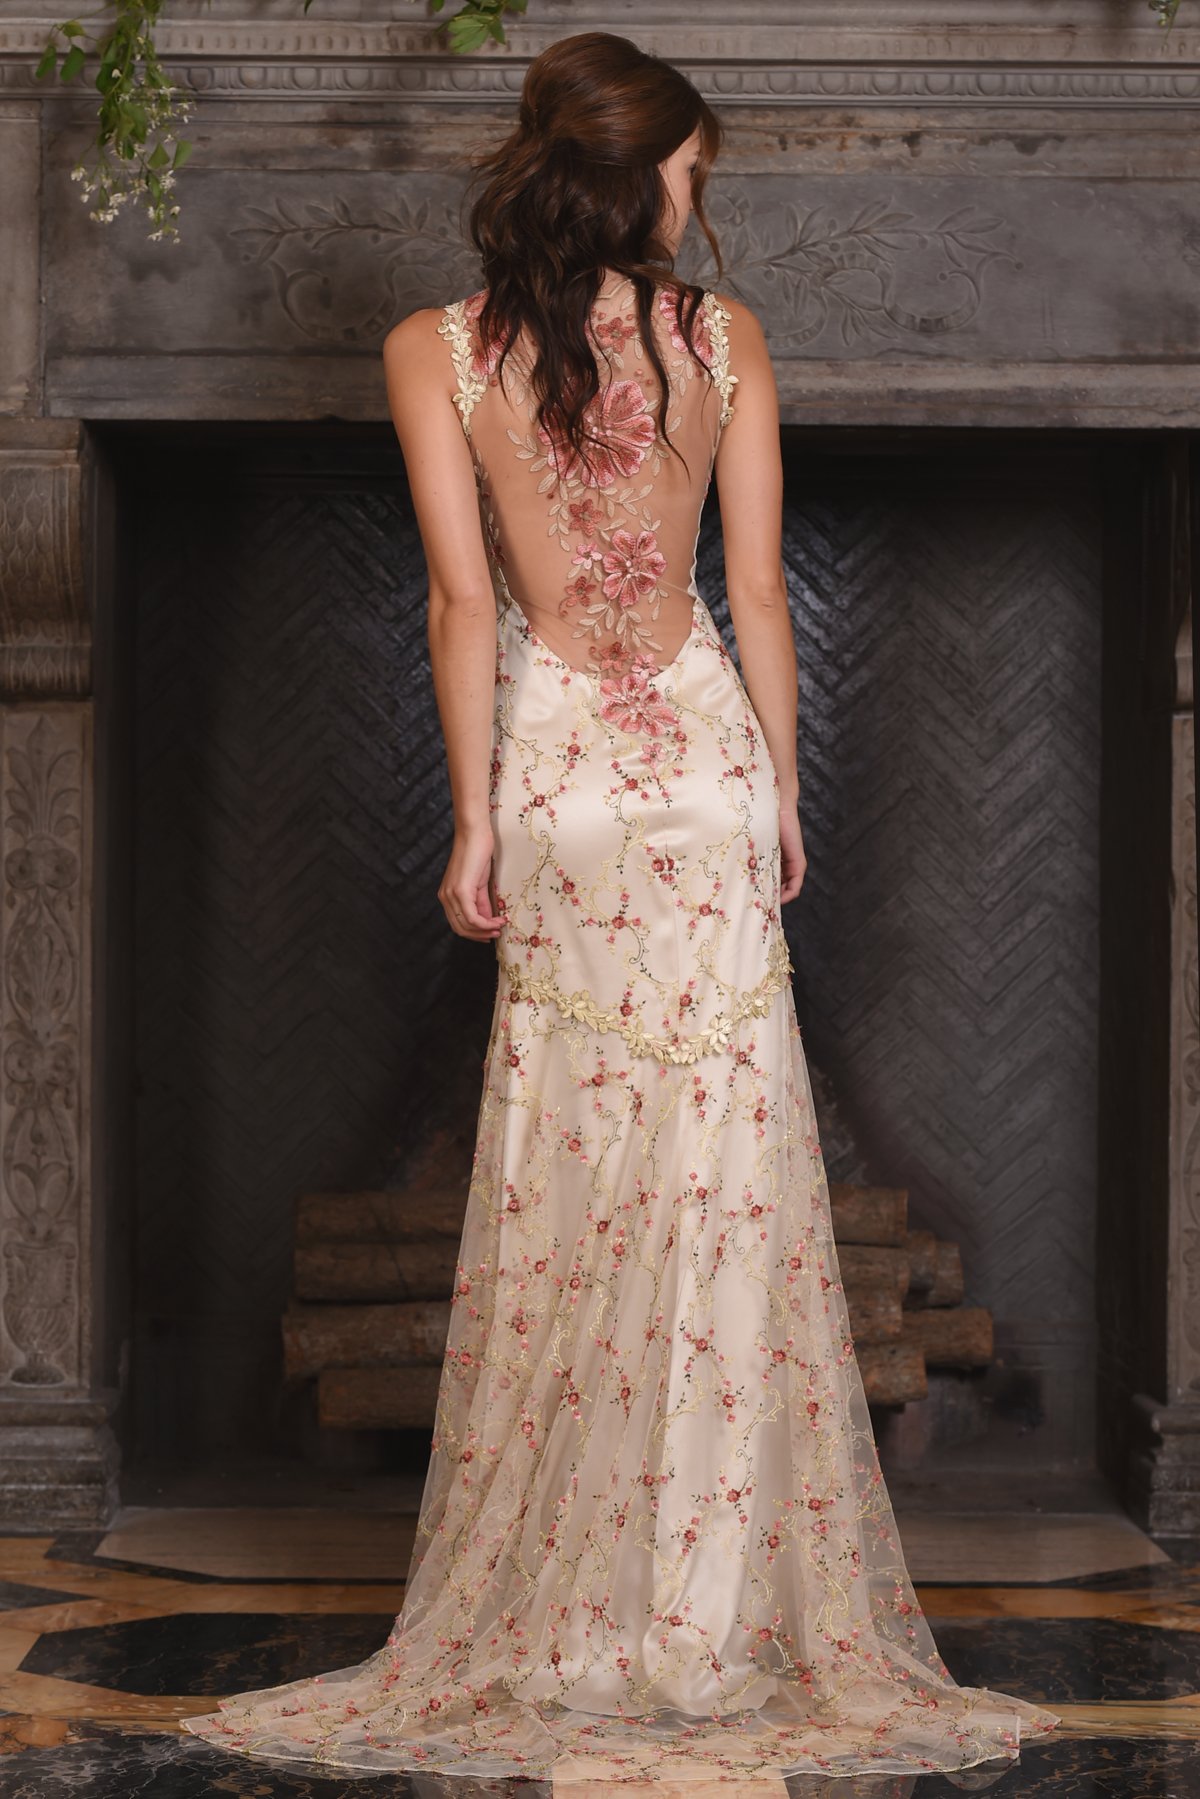 The Maple gown, from Claire Pettibone's 'The Four Seasons' bridal couture collection for 2017.